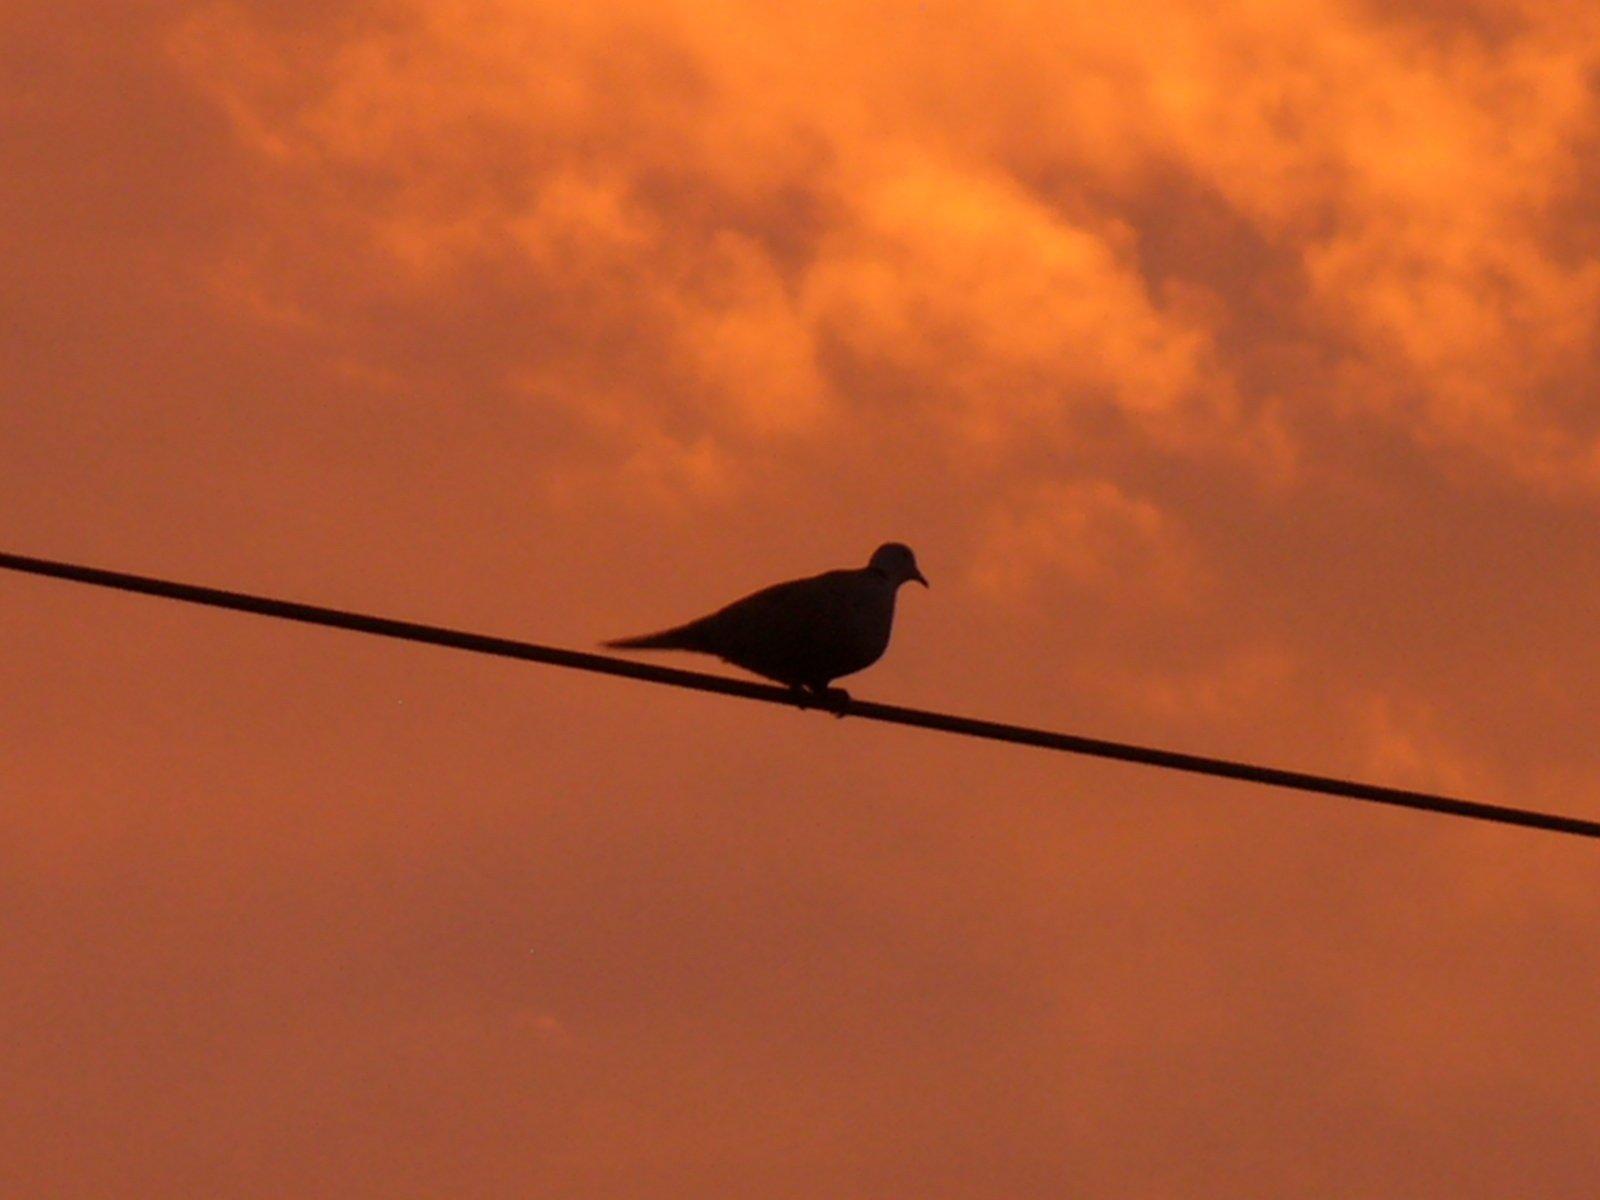 a bird sitting on the electrical wire under clouds